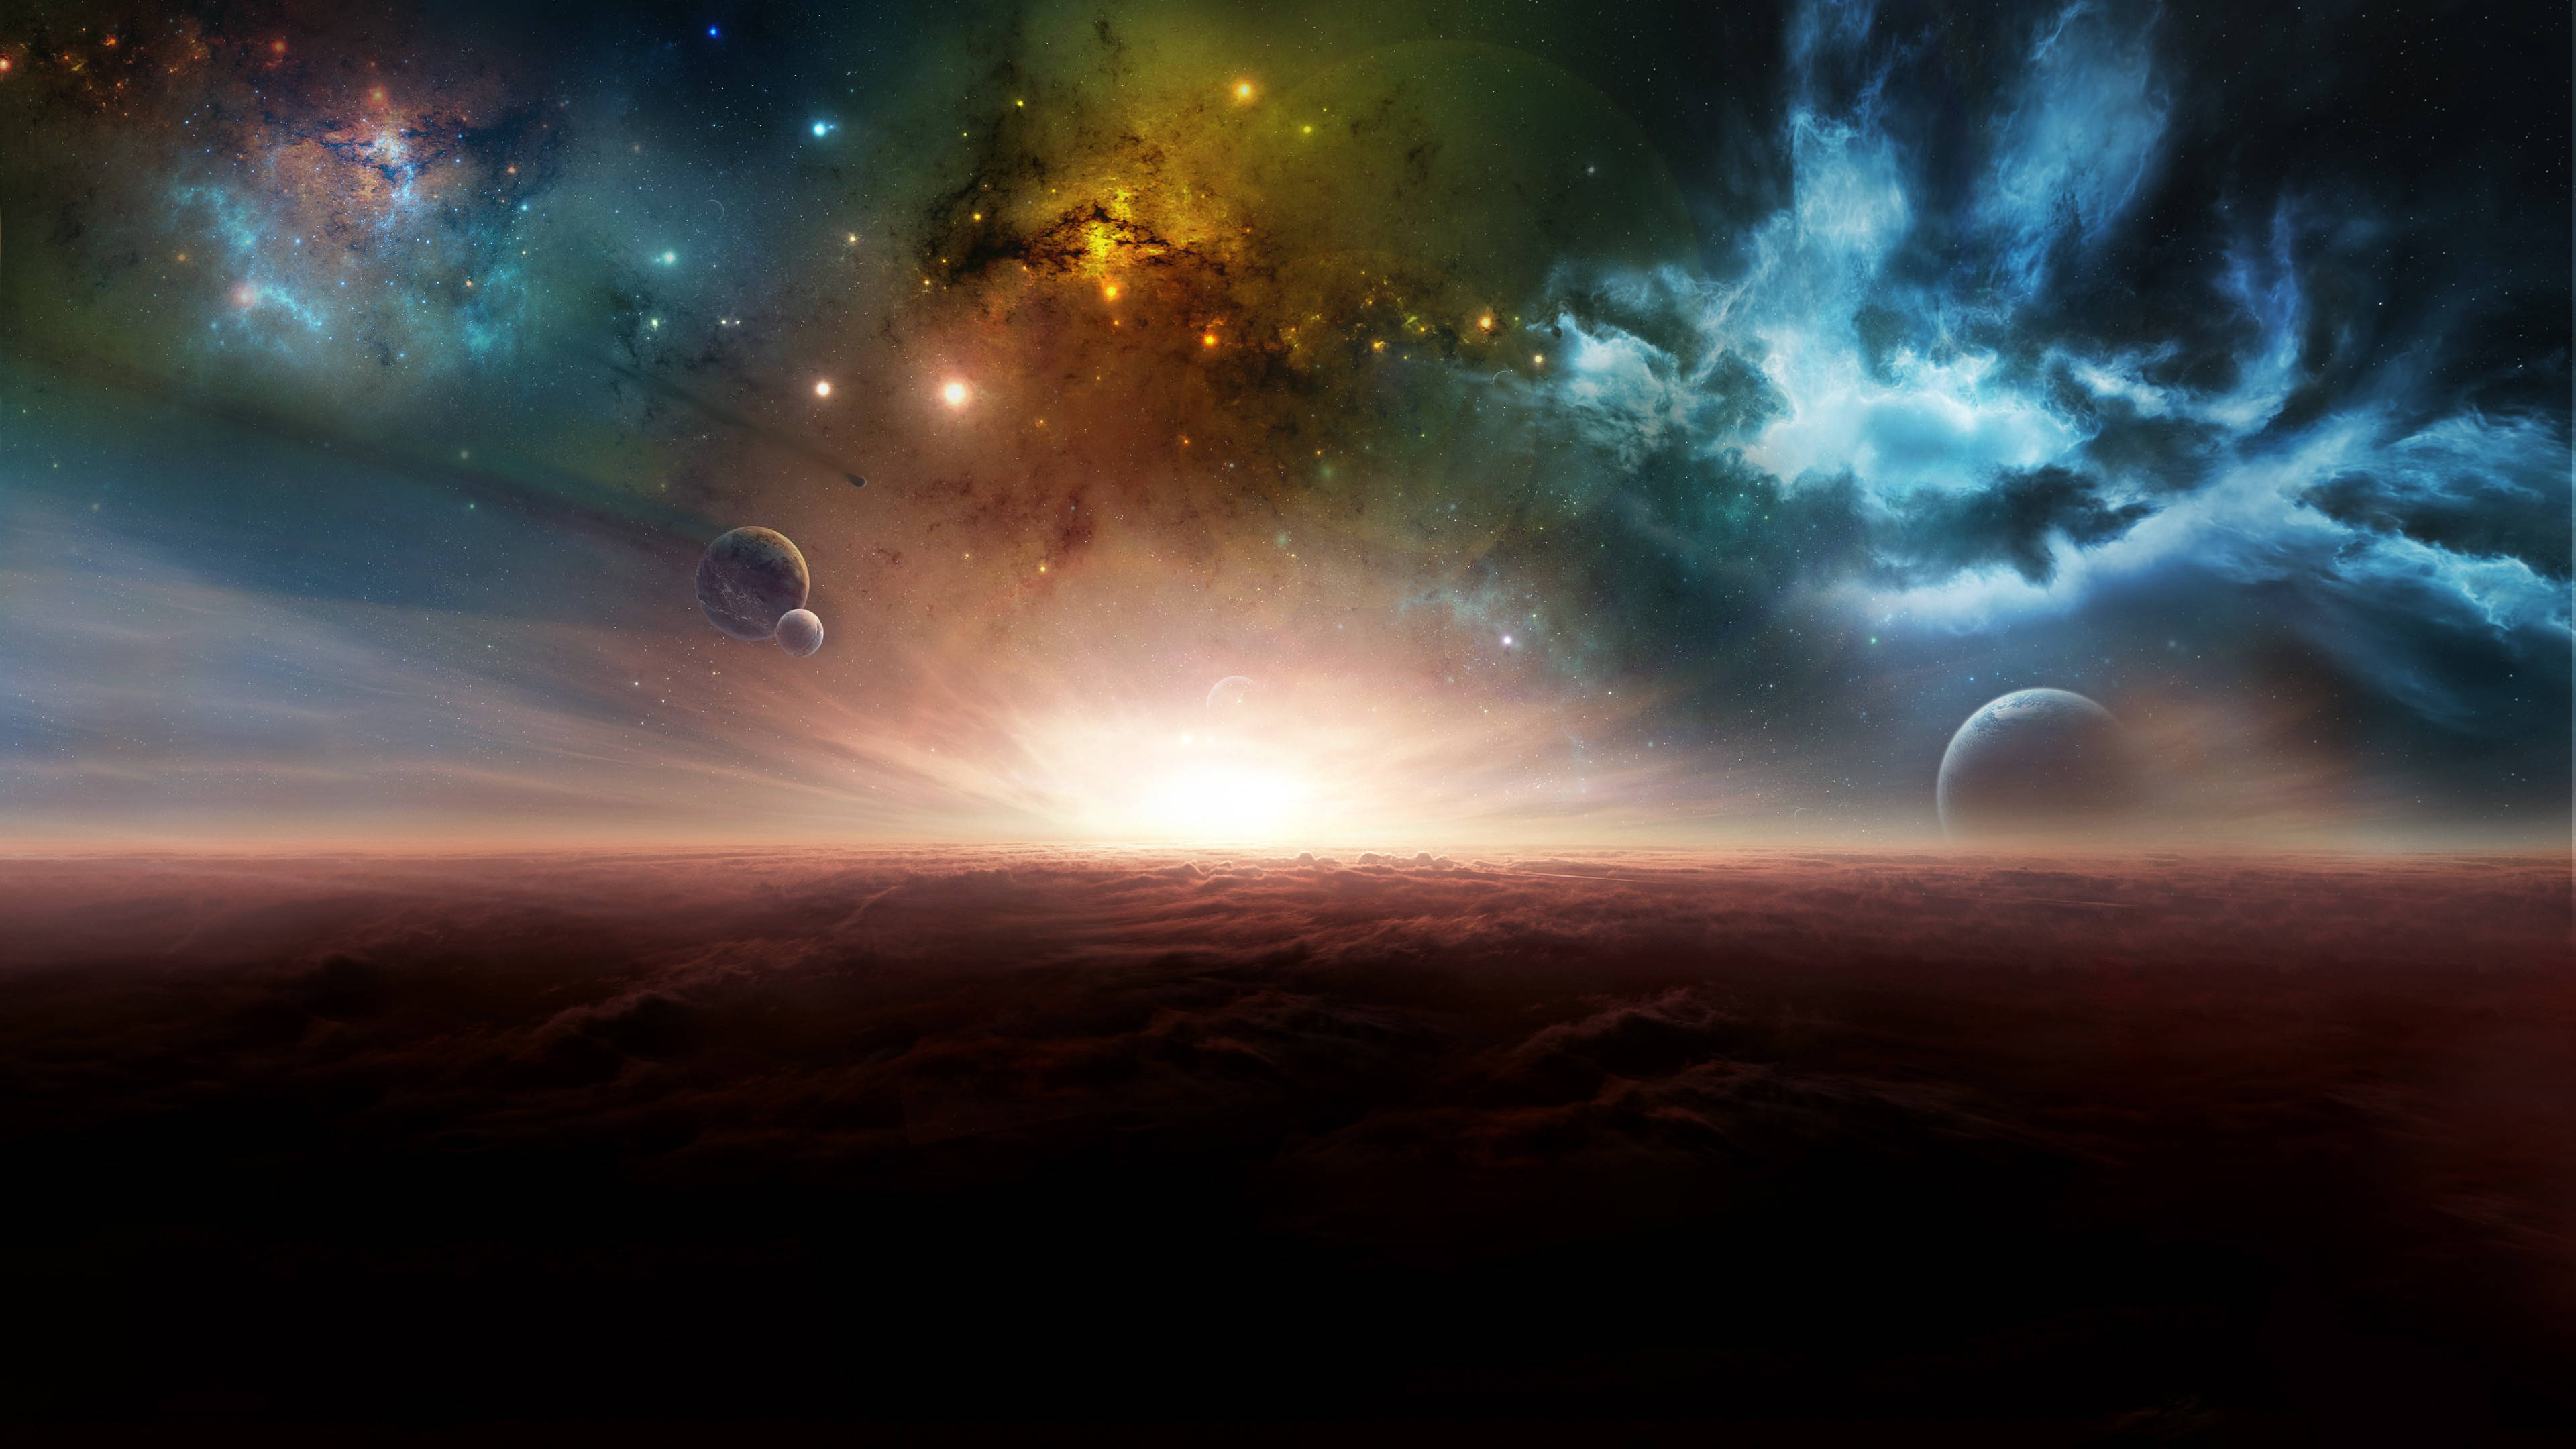 Different Planets In A Colorful Galaxy Wallpaper